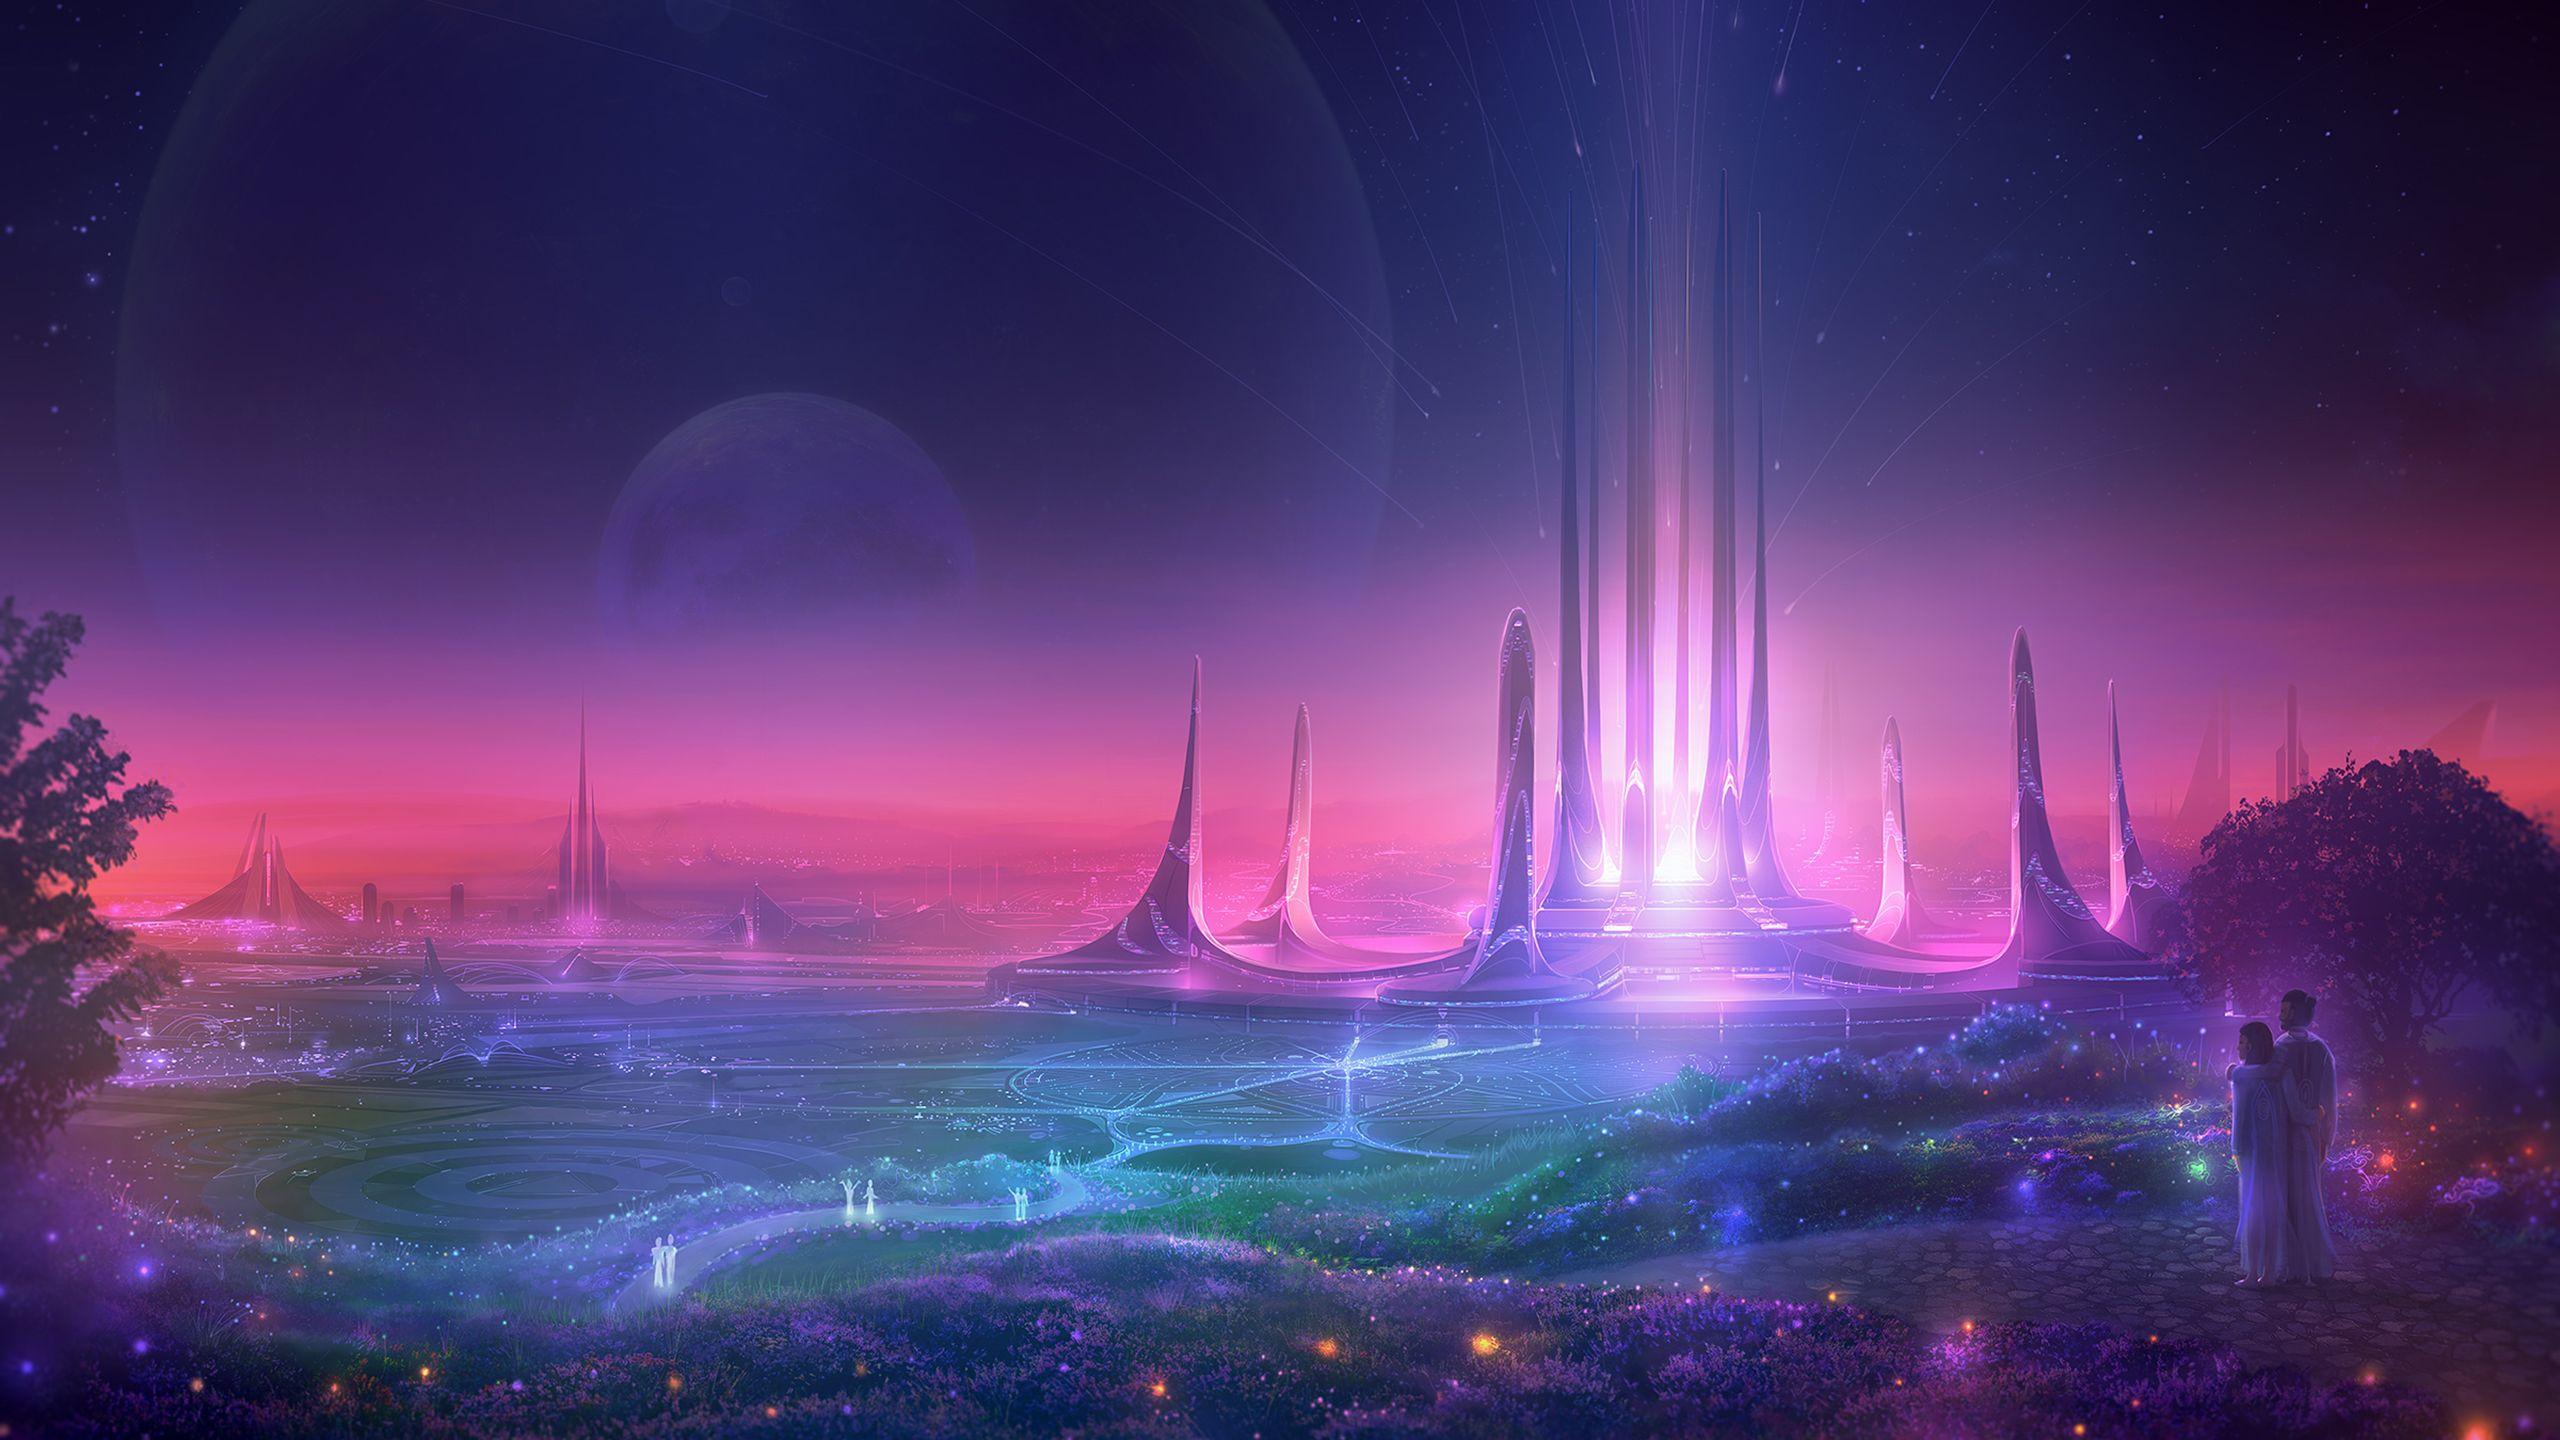 Sci-Fi City Hd Wallpapers - Top Free Sci-Fi City Hd Backgrounds